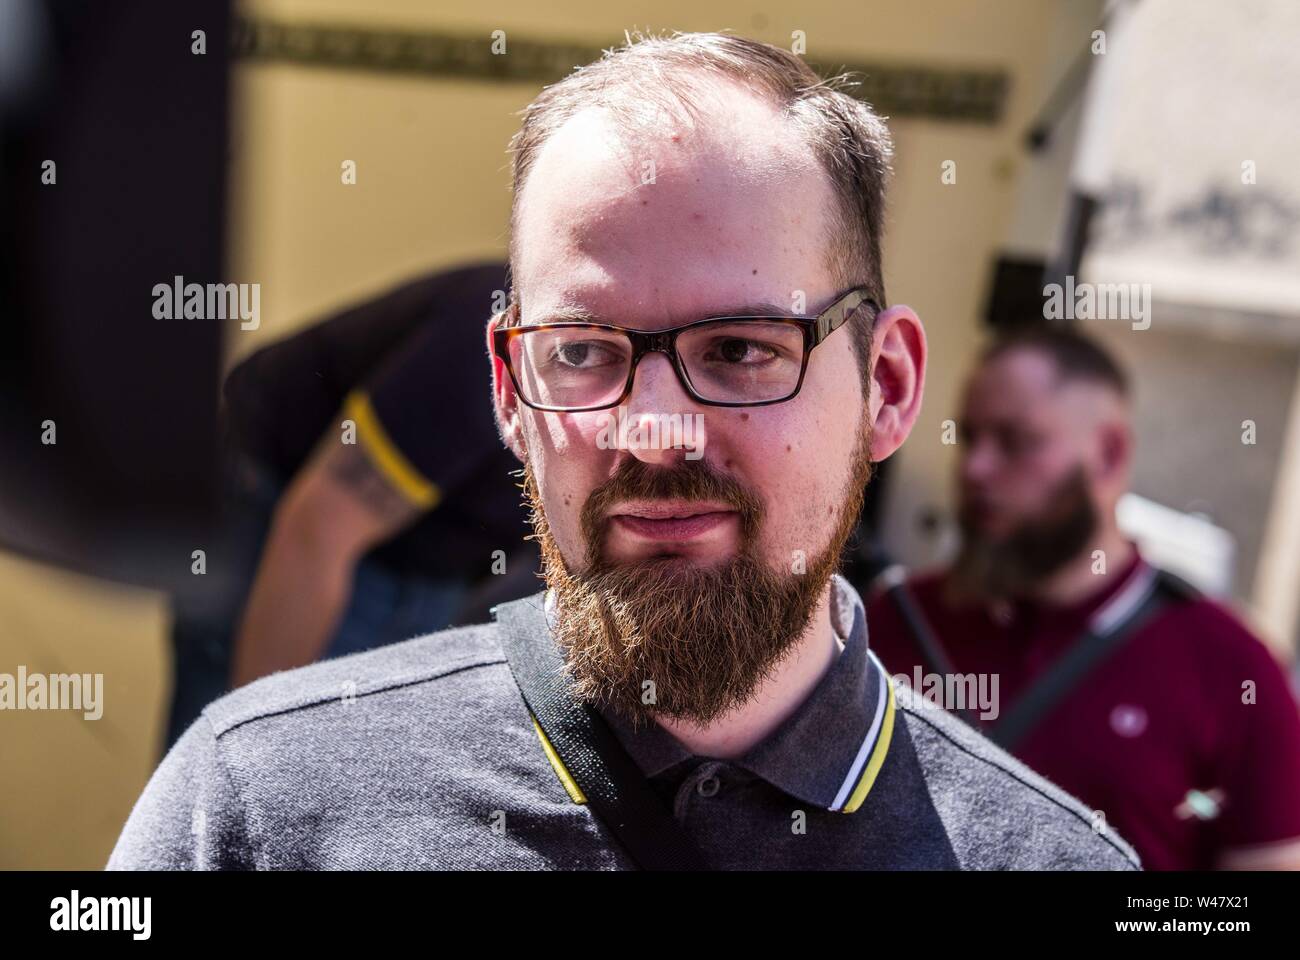 Halle Saale, Sachsen Anhalt, Germany. 20th July, 2019. ROBERT TIMM, one of the nationally active figures of the right-extremist, white supremacist Identitaere Bewegung. Amid protests, the white supremacist, right extremist Identitaere Bewegung (Generation Identity, Identitaren Movement) held a rally in Halle (Saale). The Identitaere have recently faced numerous challenges, including raids to explore the connection of its head Martin Sellner to the Christ Church shooter, as well as in Germany where the IB was officially classified as 'right-extremist''. The group has renewed the use of the Stock Photo